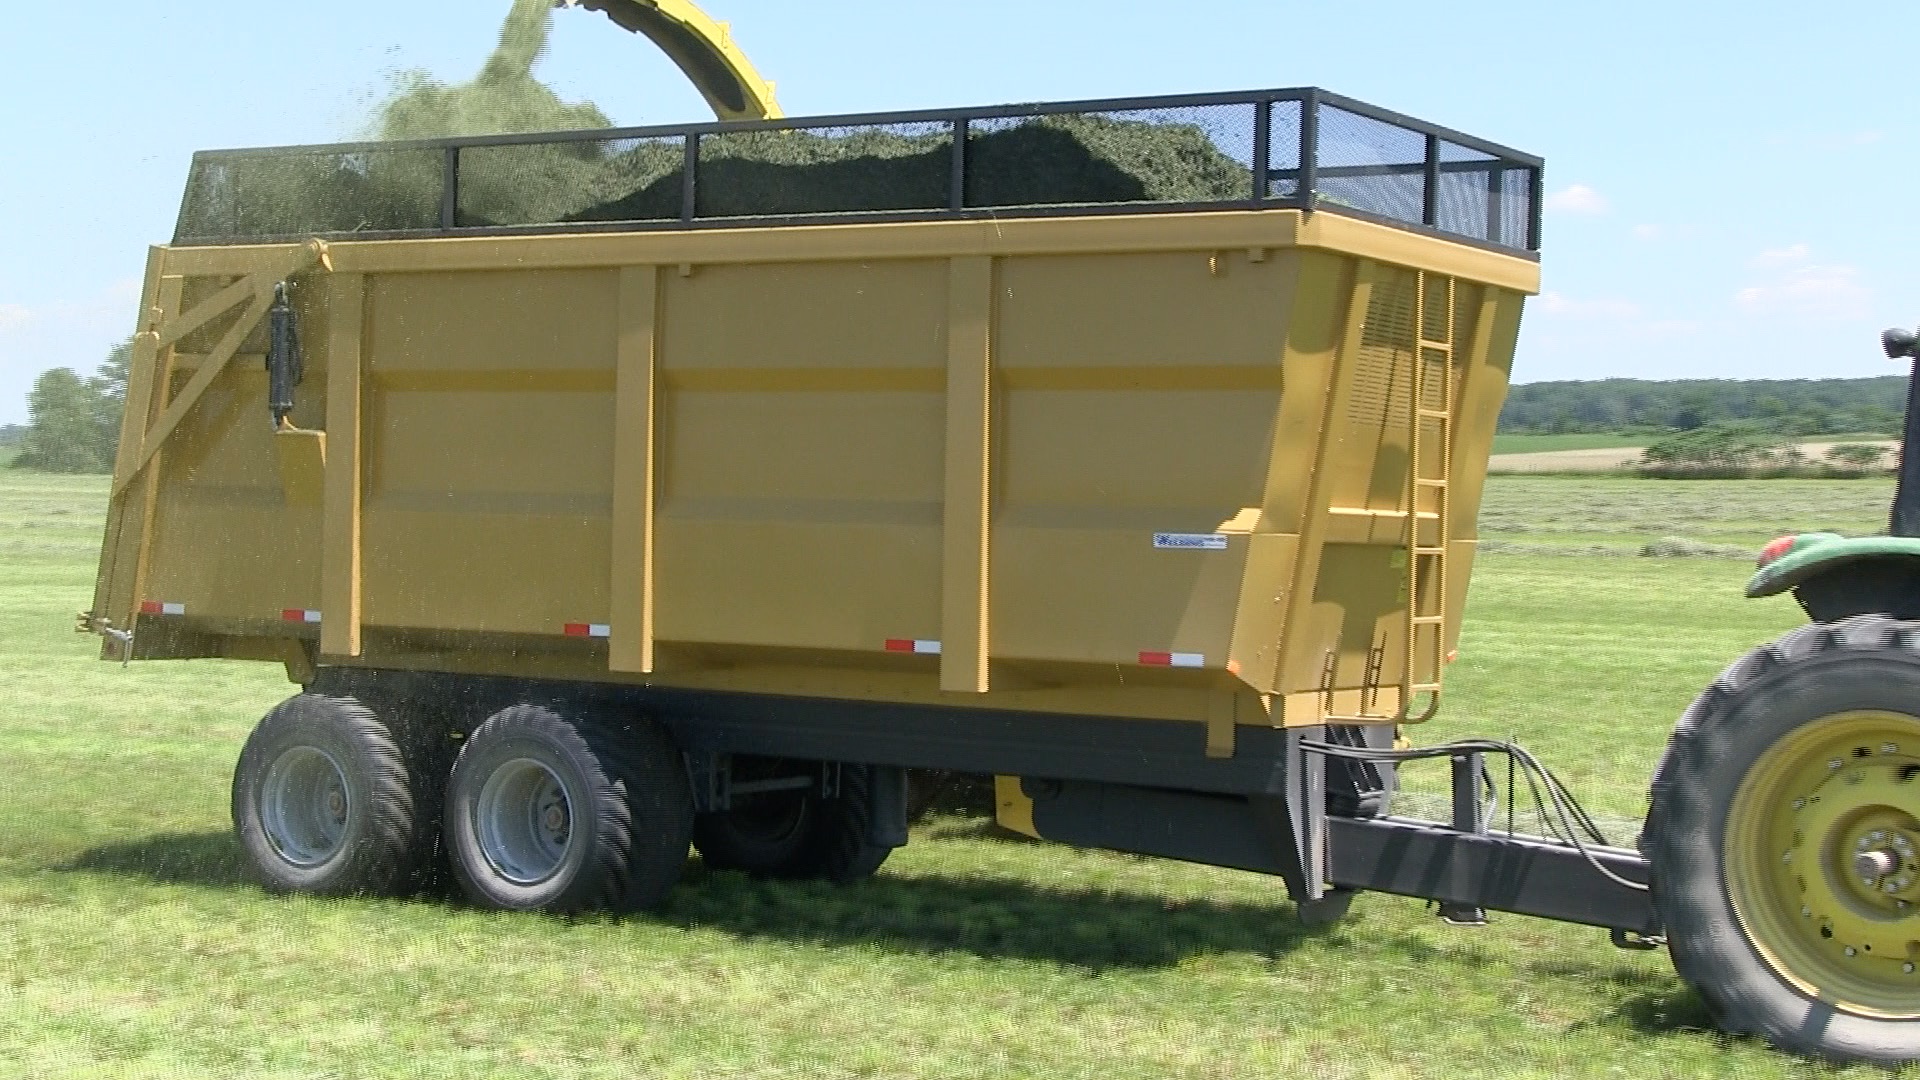 An image of the 20 ton dump trailer getting hay silage loaded into it